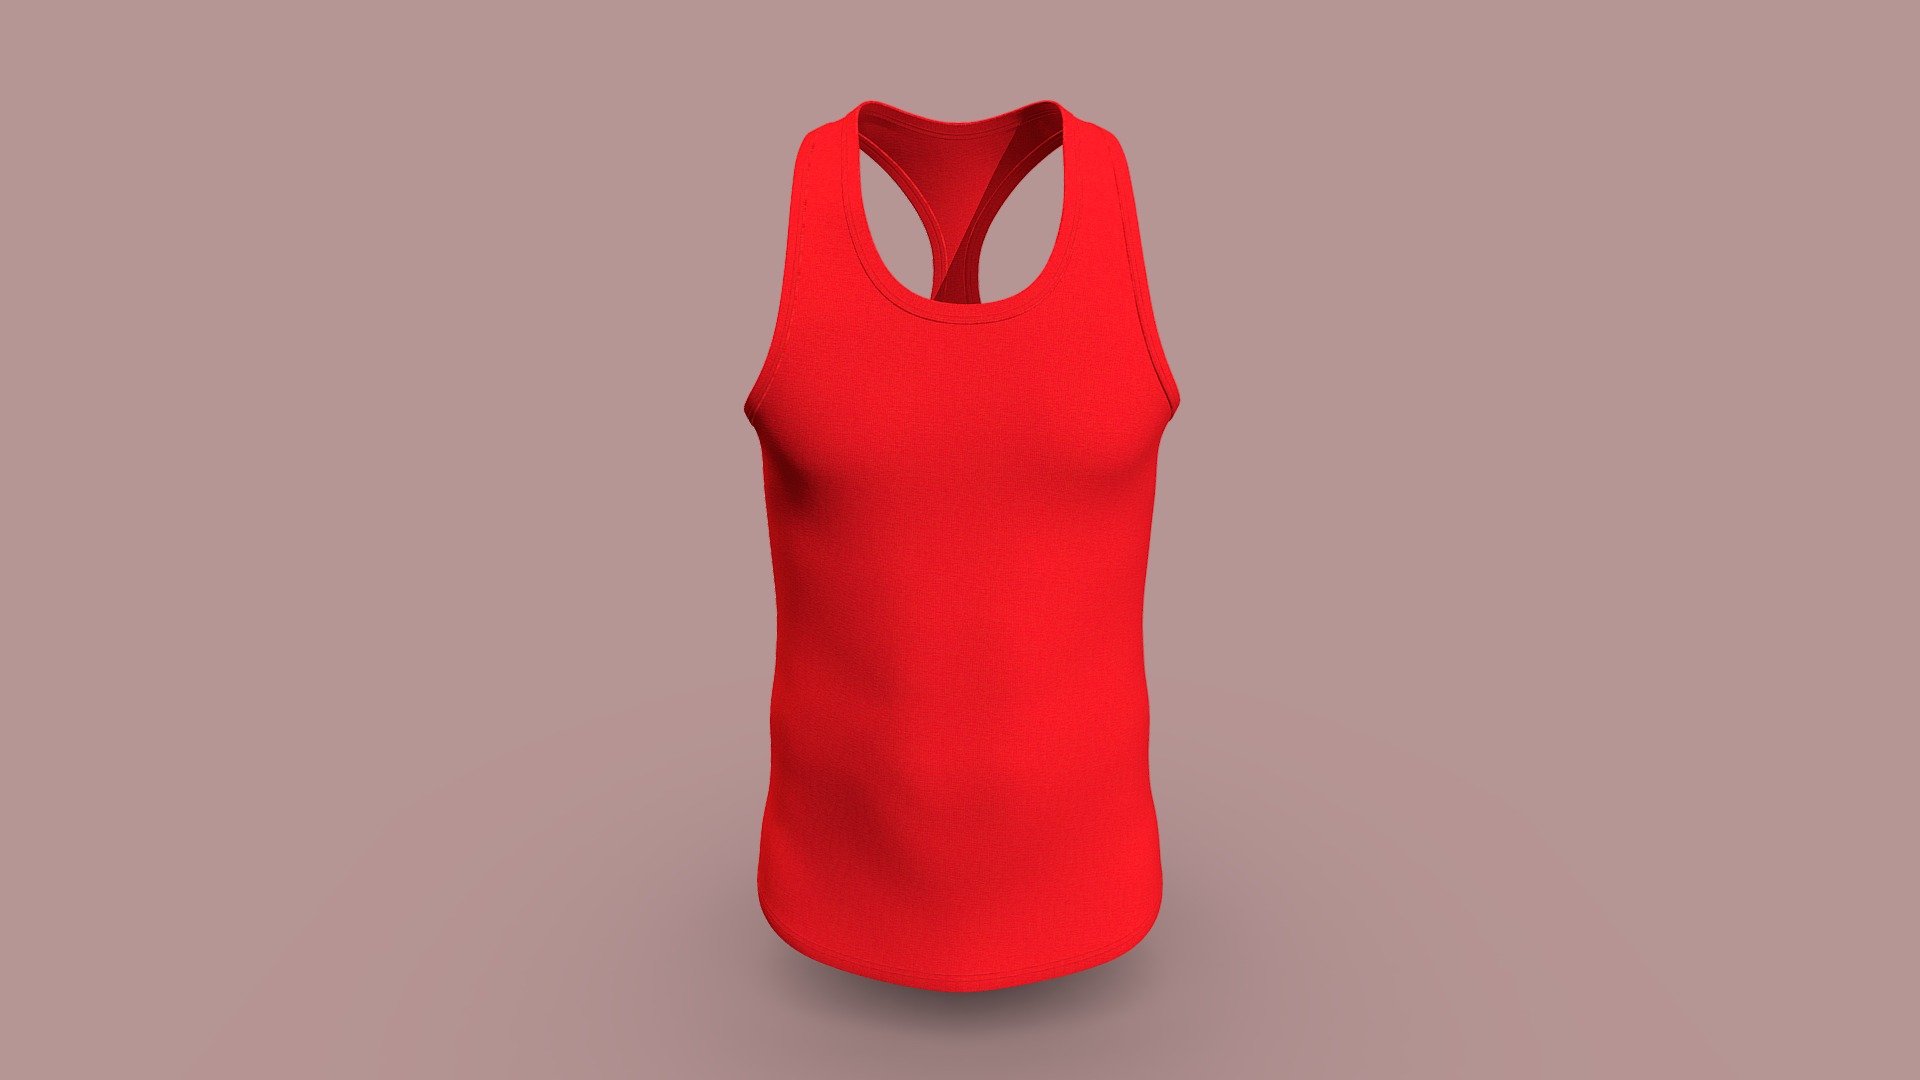 Cloth Title = Basic Tank Tops Design 

SKU = DG100208 

Category = Unisex 

Product Type = Tank Top 

Cloth Length = Regular 

Body Fit = Fitted
  
Occasion = Sportswear 
 

Our Services:

3D Apparel Design.

OBJ,FBX,GLTF Making with High/Low Poly.

Fabric Digitalization.

Mockup making.

3D Teck Pack.

Pattern Making.

2D Illustration.

Cloth Animation and 360 Spin Video.


Contact us:- 

Email: info@digitalfashionwear.com 

Website: https://digitalfashionwear.com 


We designed all the types of cloth specially focused on product visualization, e-commerce, fitting, and production. 

We will design: 

T-shirts 

Polo shirts 

Hoodies 

Sweatshirt 

Jackets 

Shirts 

TankTops 

Trousers 

Bras 

Underwear 

Blazer 

Aprons 

Leggings 

and All Fashion items. 





Our goal is to make sure what we provide you, meets your demand 3d model